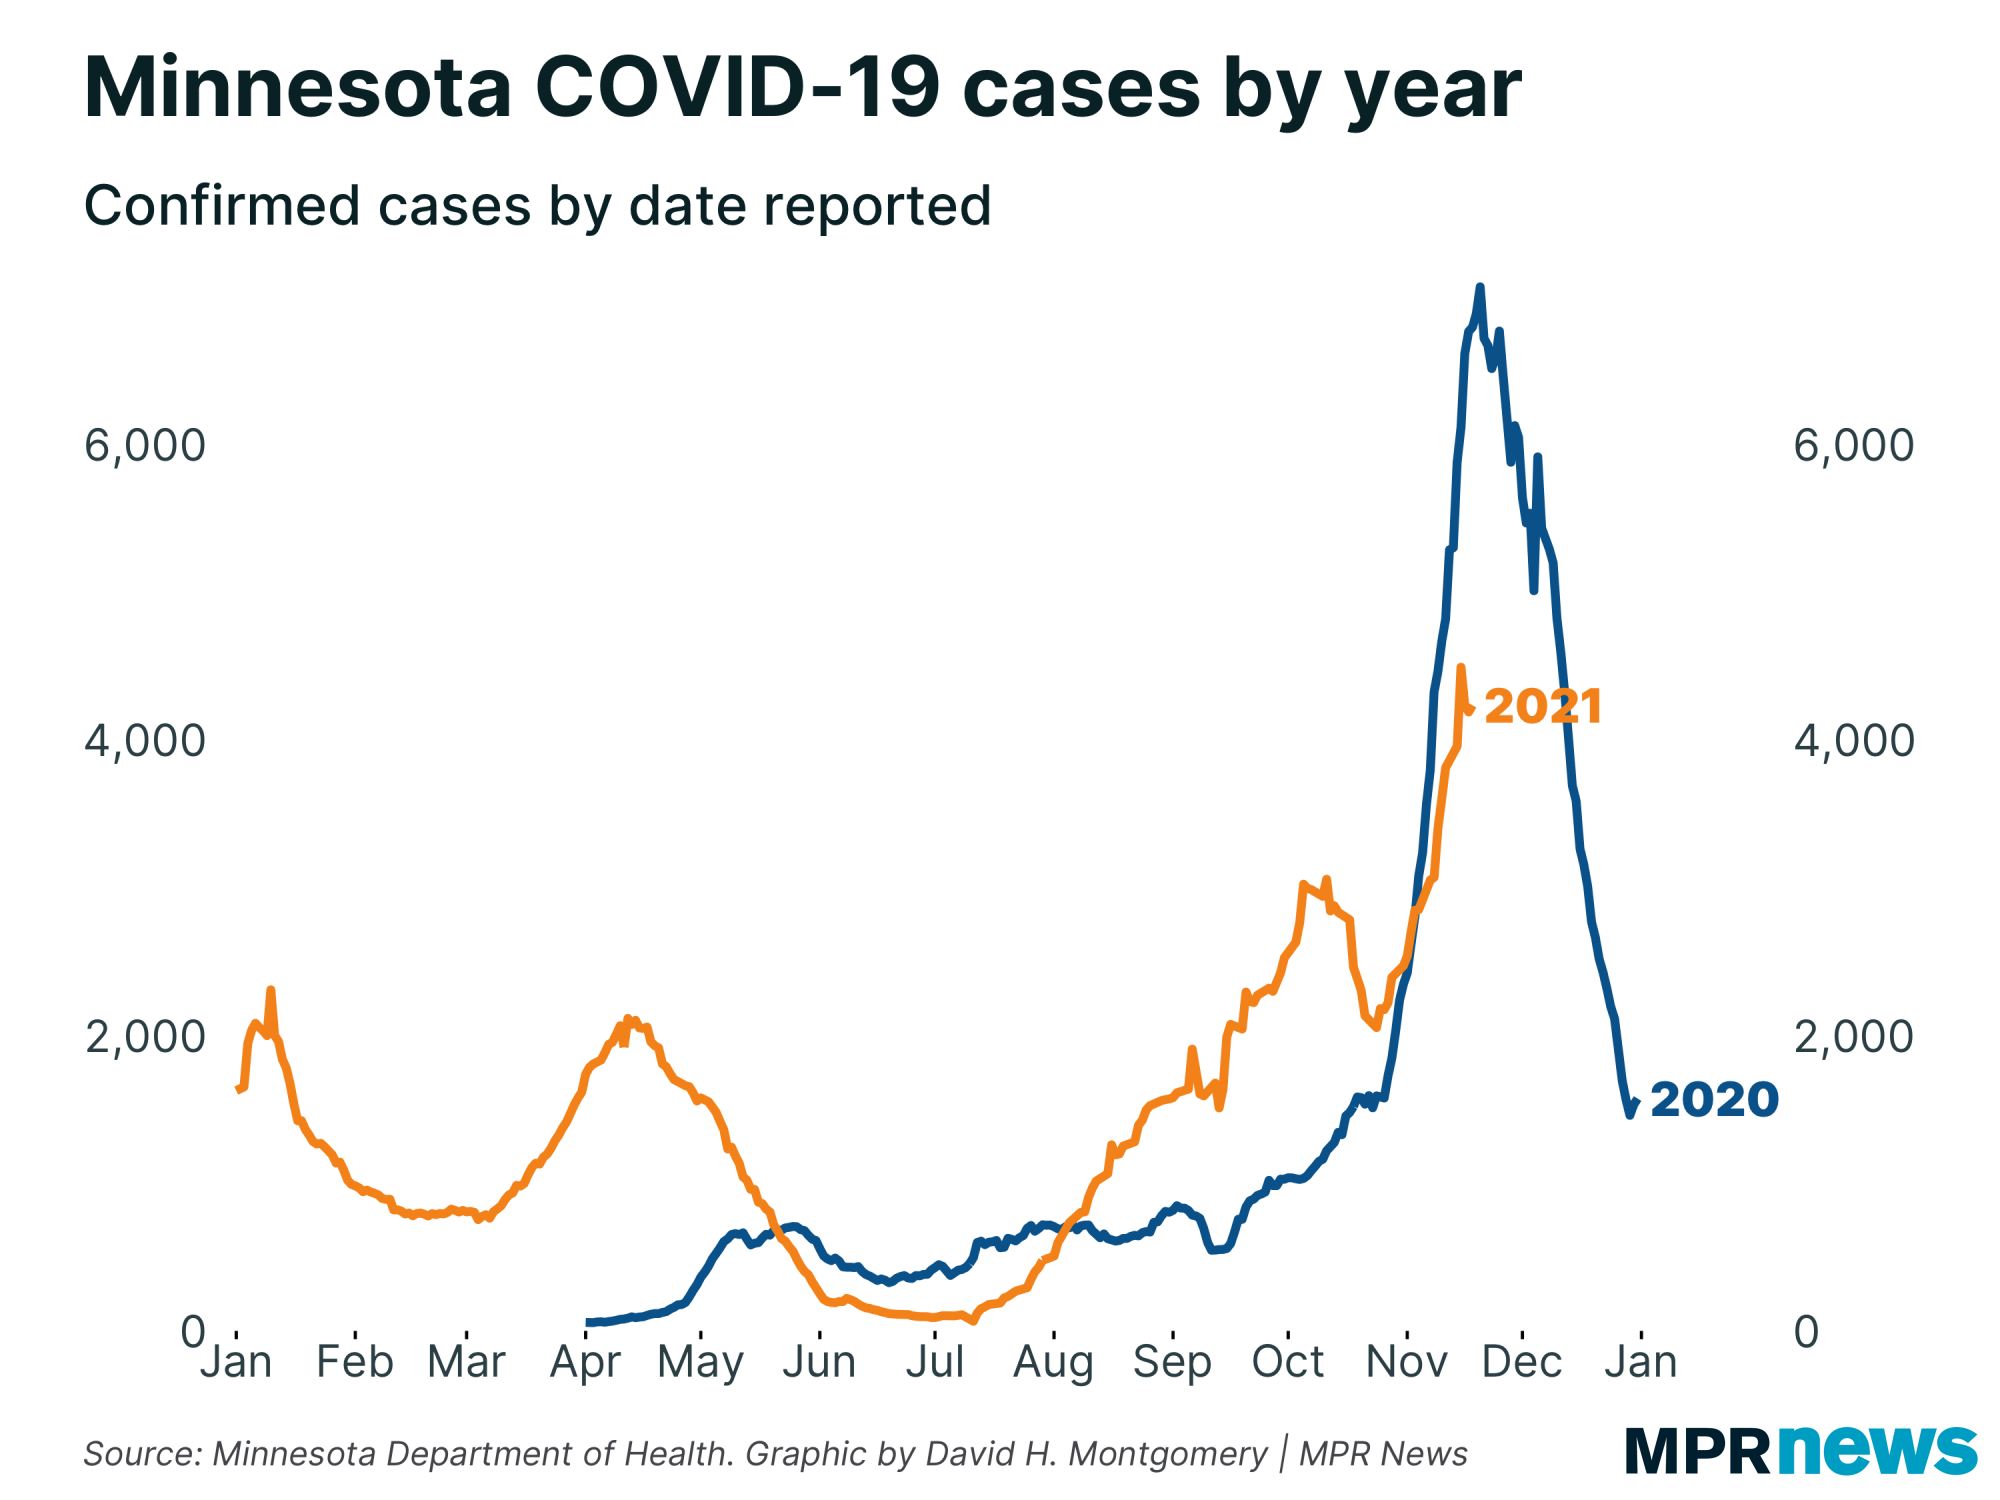 Graph of Minnesota's COVID-19 cases by year